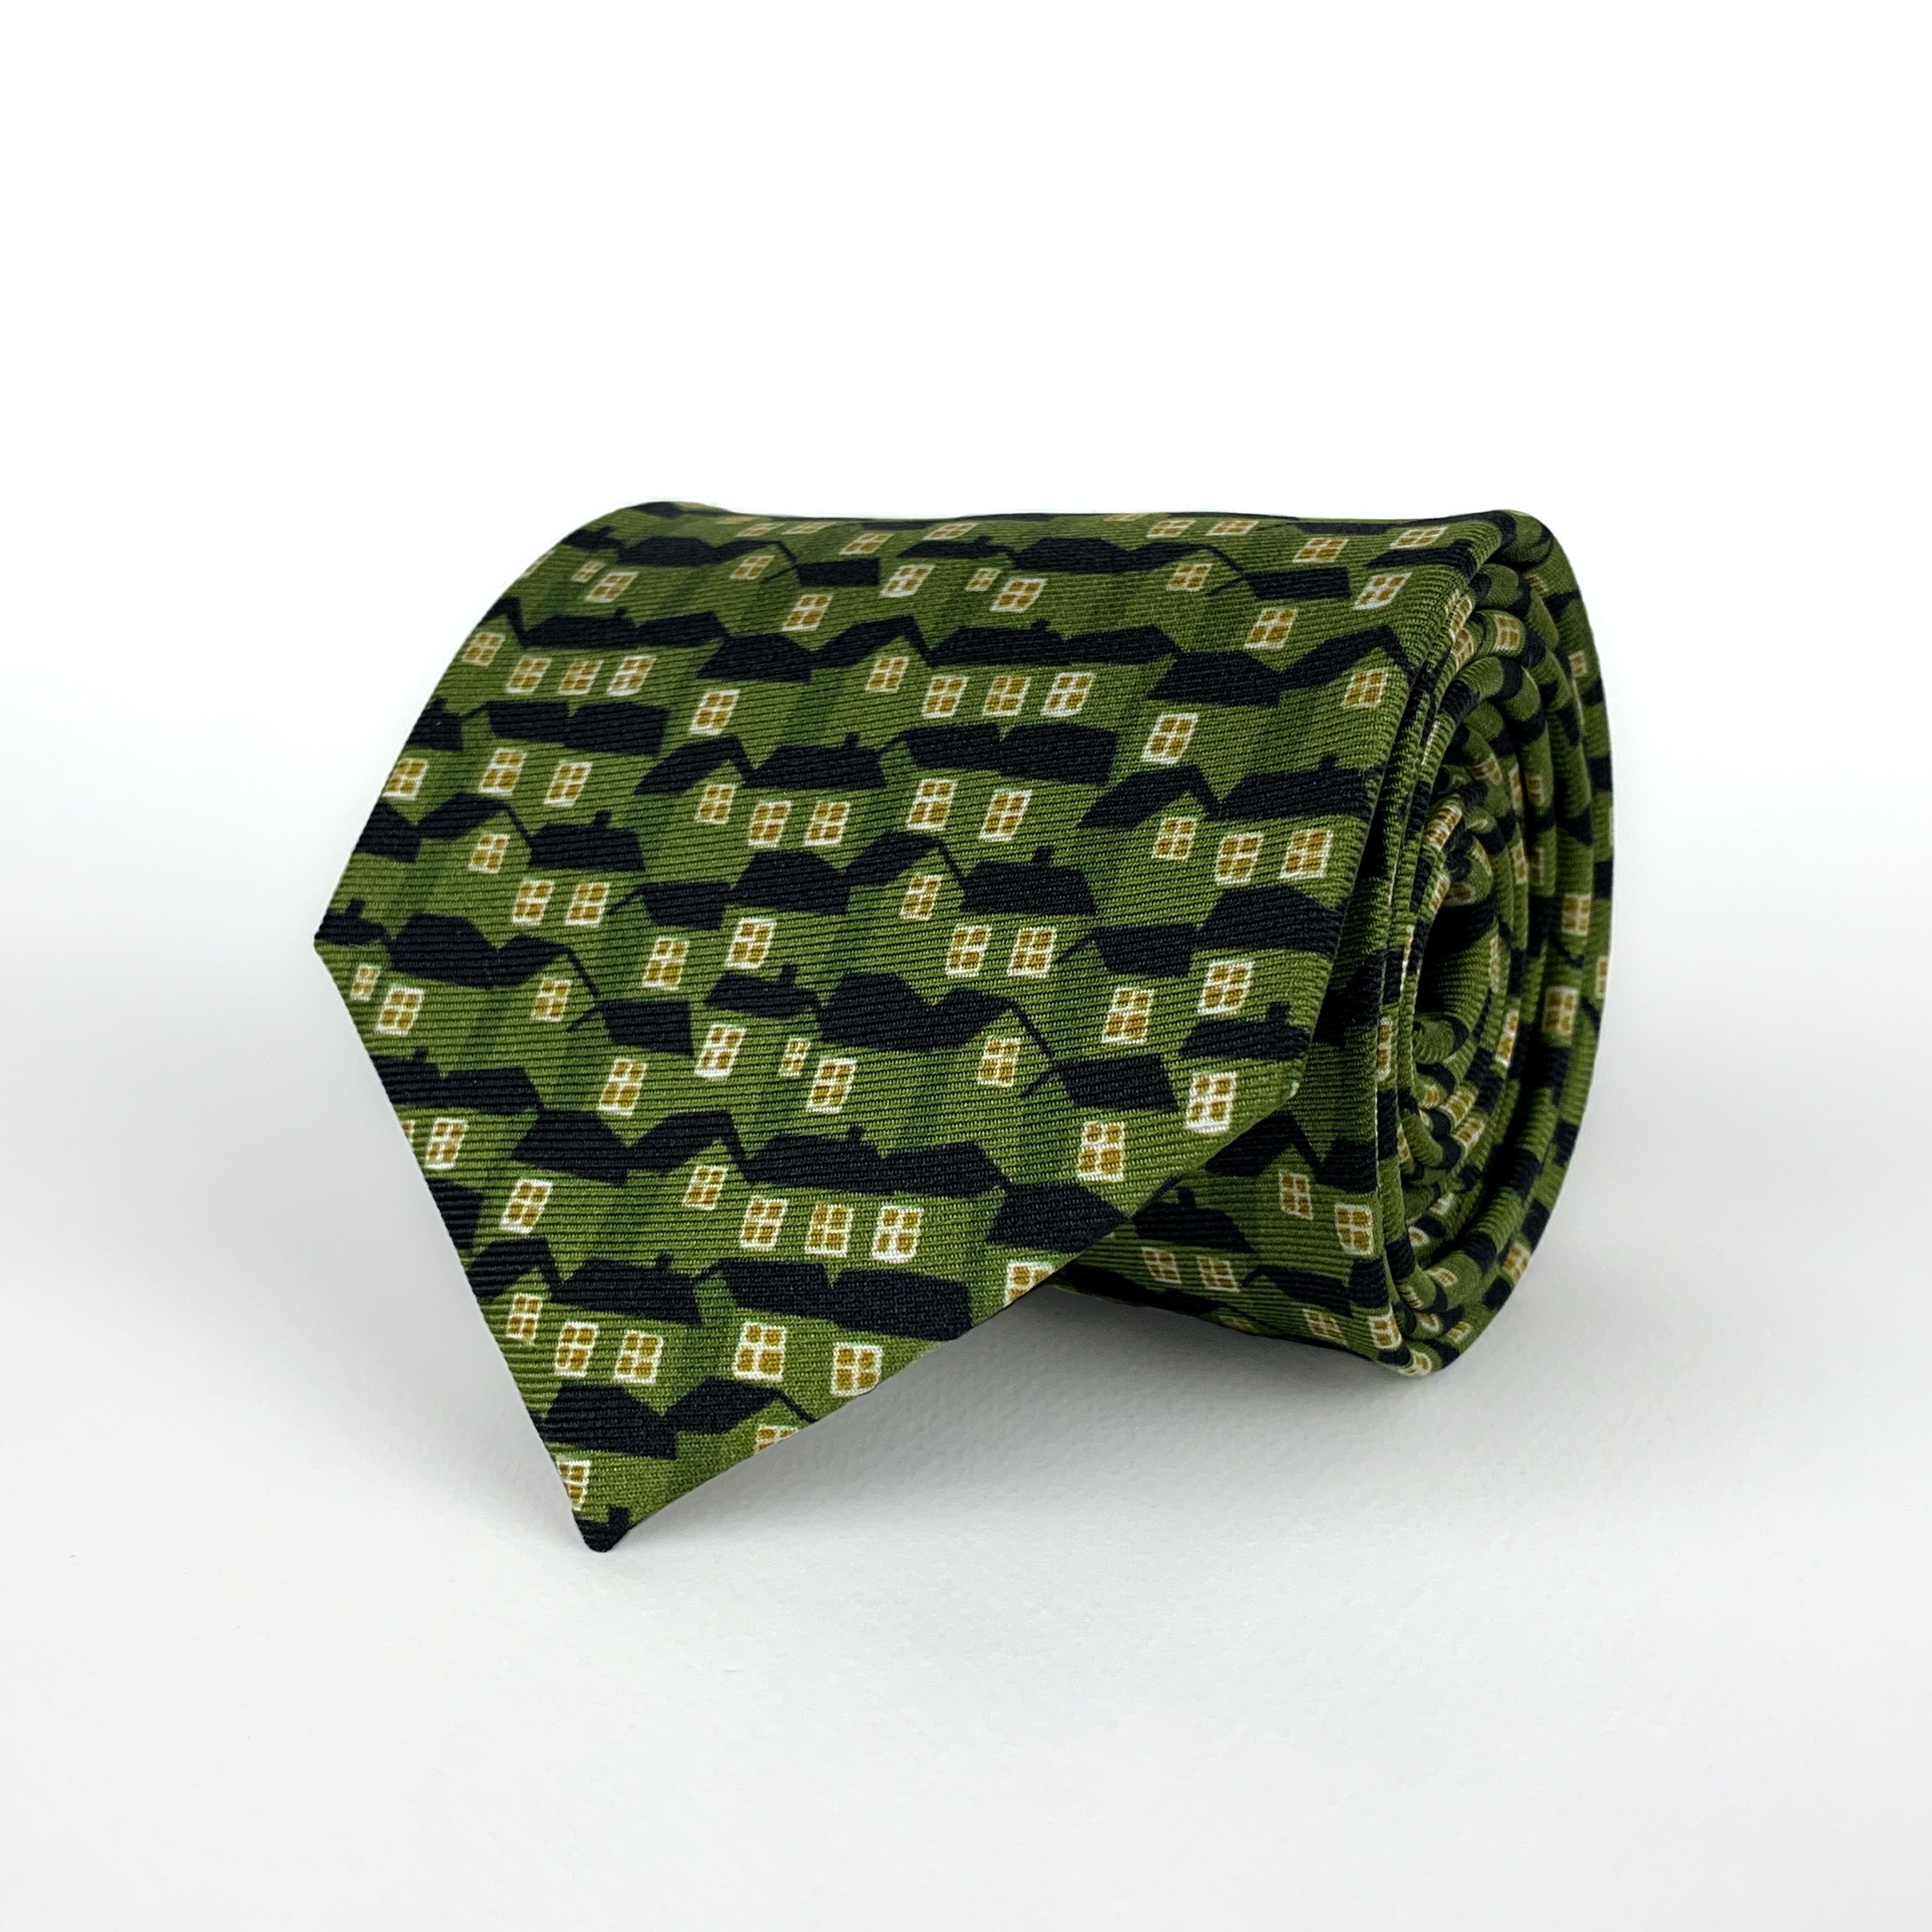 Mulberry silk twill tie printed with a pattern of houses in a green color with black roofs and yellow windows rolled and placed on a white background